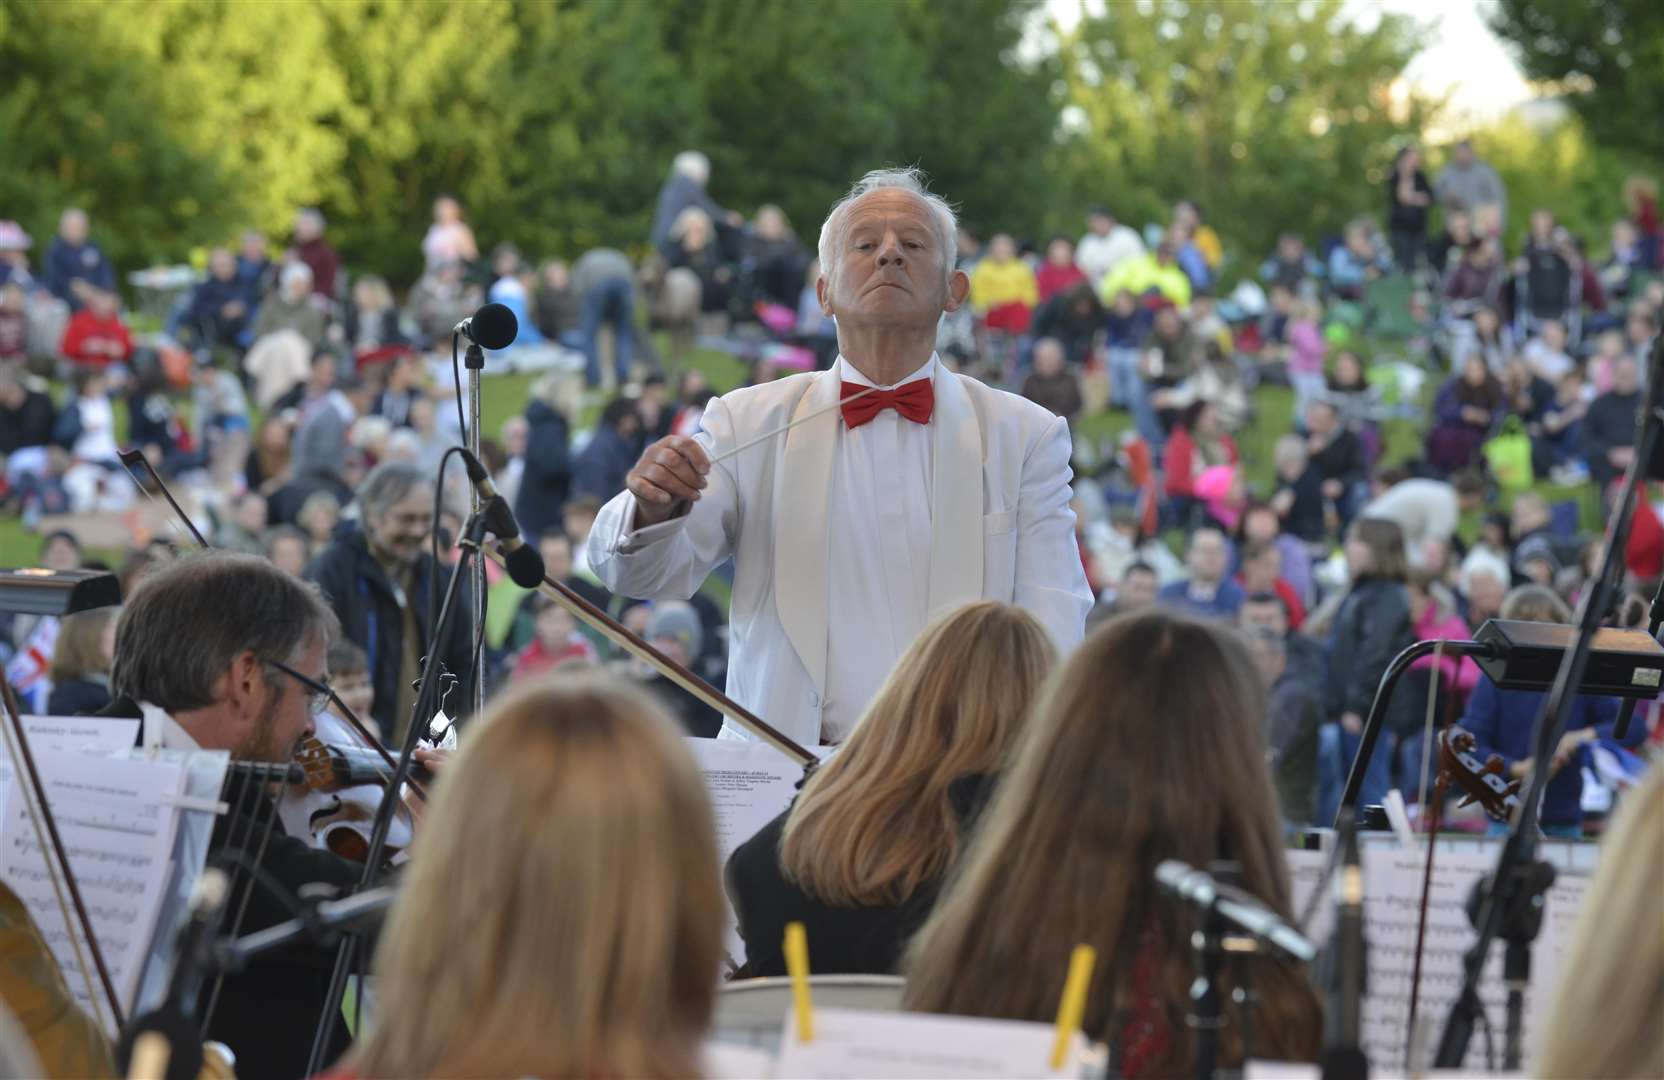 John Georgiadis leads the orchestra at Proms in the Park Picture: Martin Apps